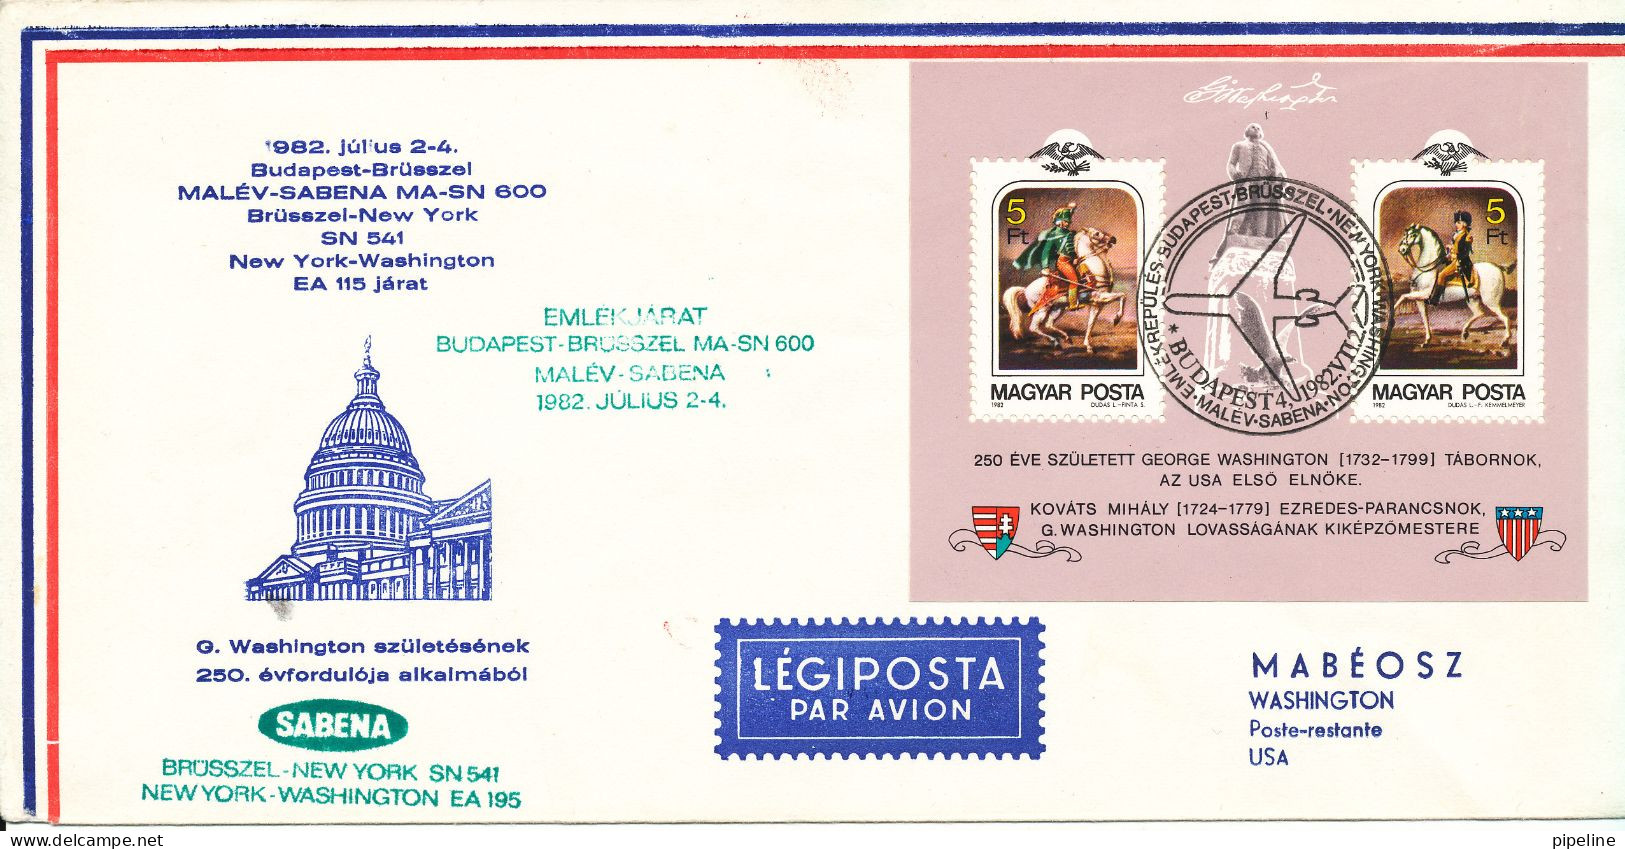 Hungary Air Mail Cover Special Flight Malev Sabena Budapest- Bruxelles - New York - Washington 2-7-1982 With Cachet - Lettres & Documents